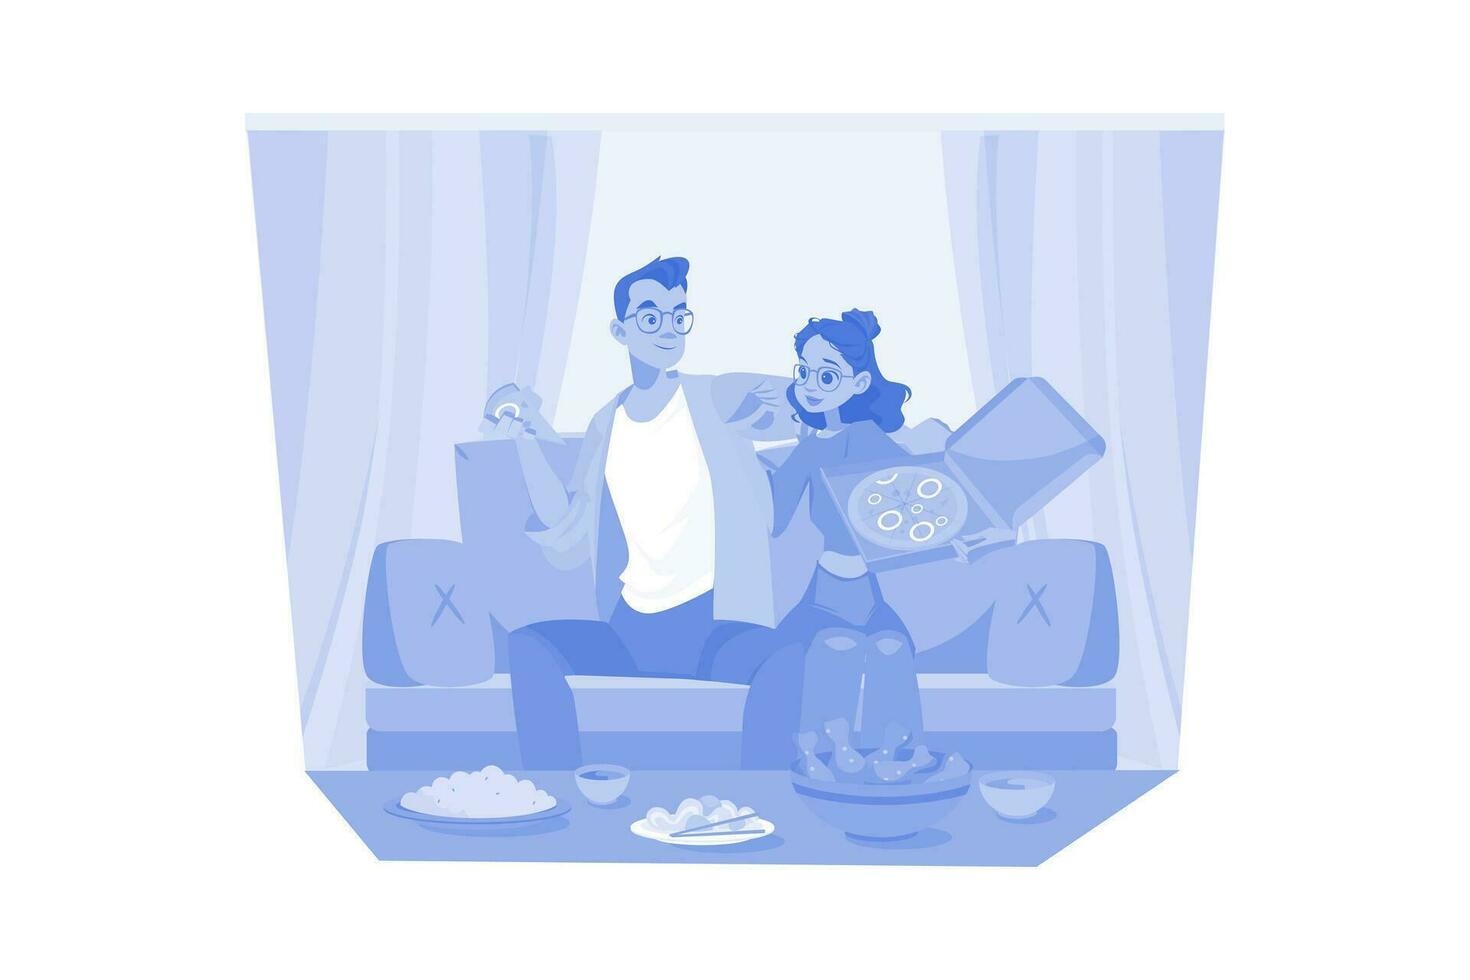 Couple In Love Illustration concept. A flat illustration isolated on white background vector